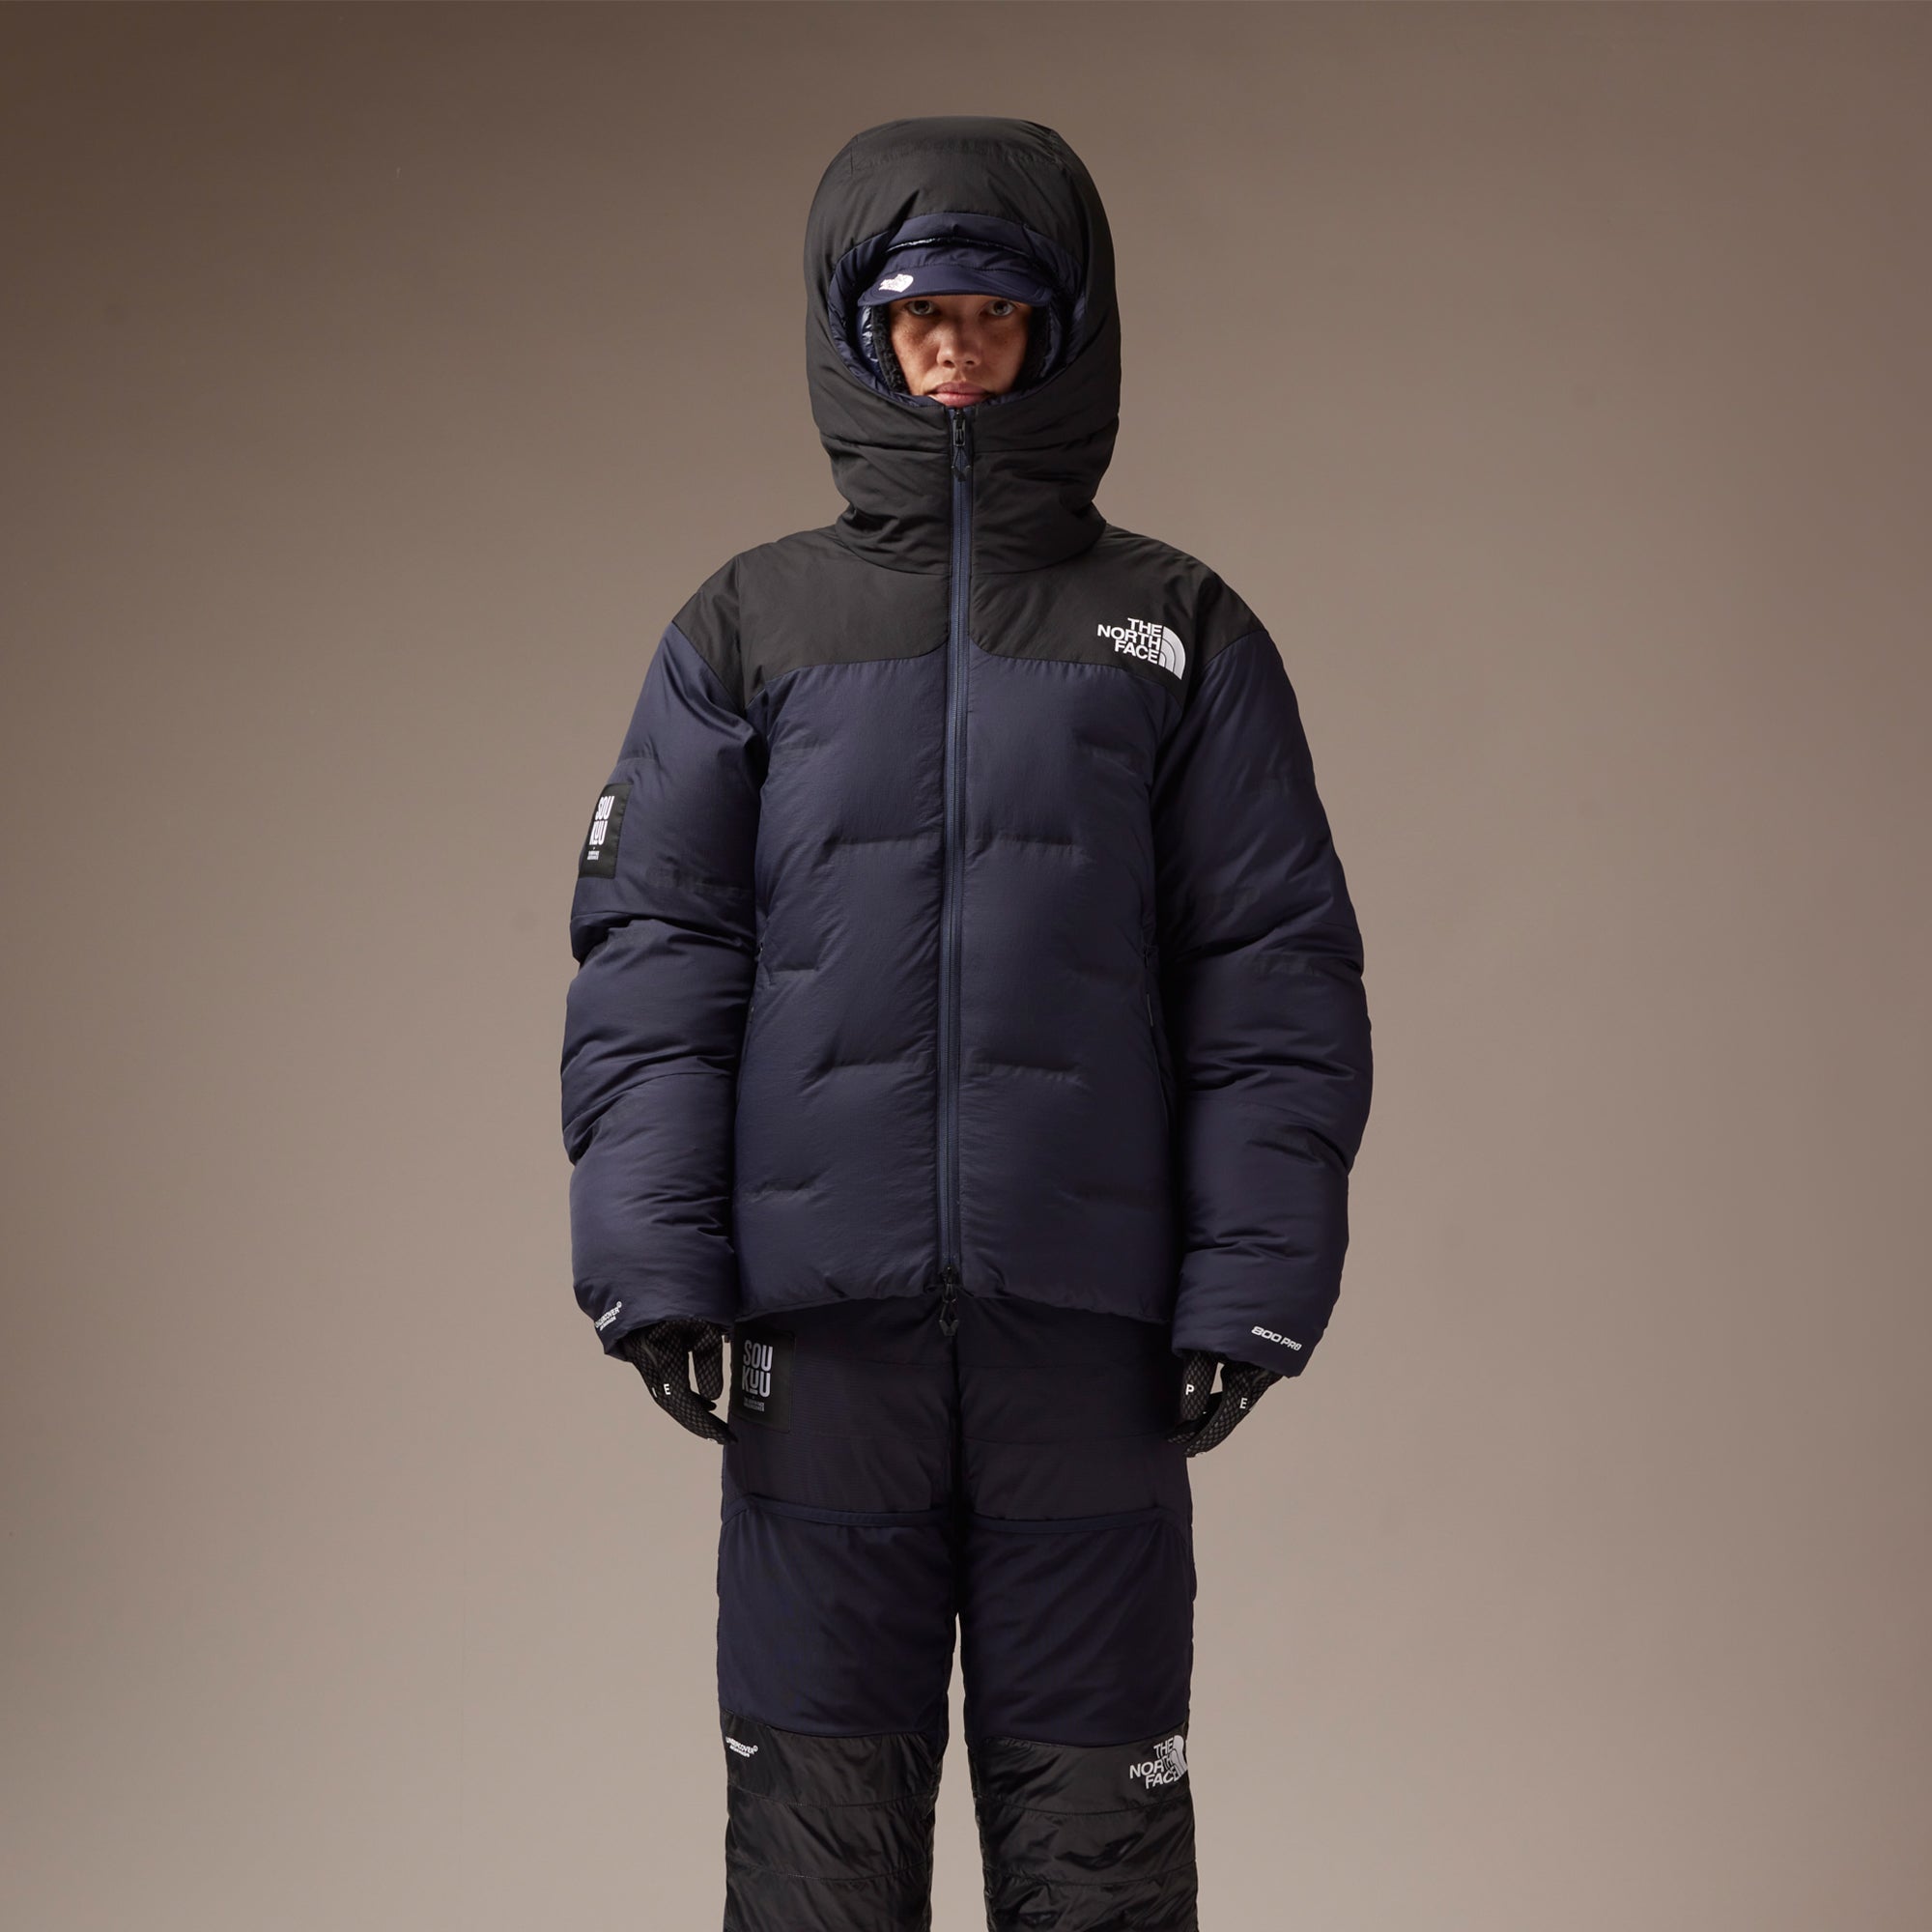 Shop The North Face at Extra Butter